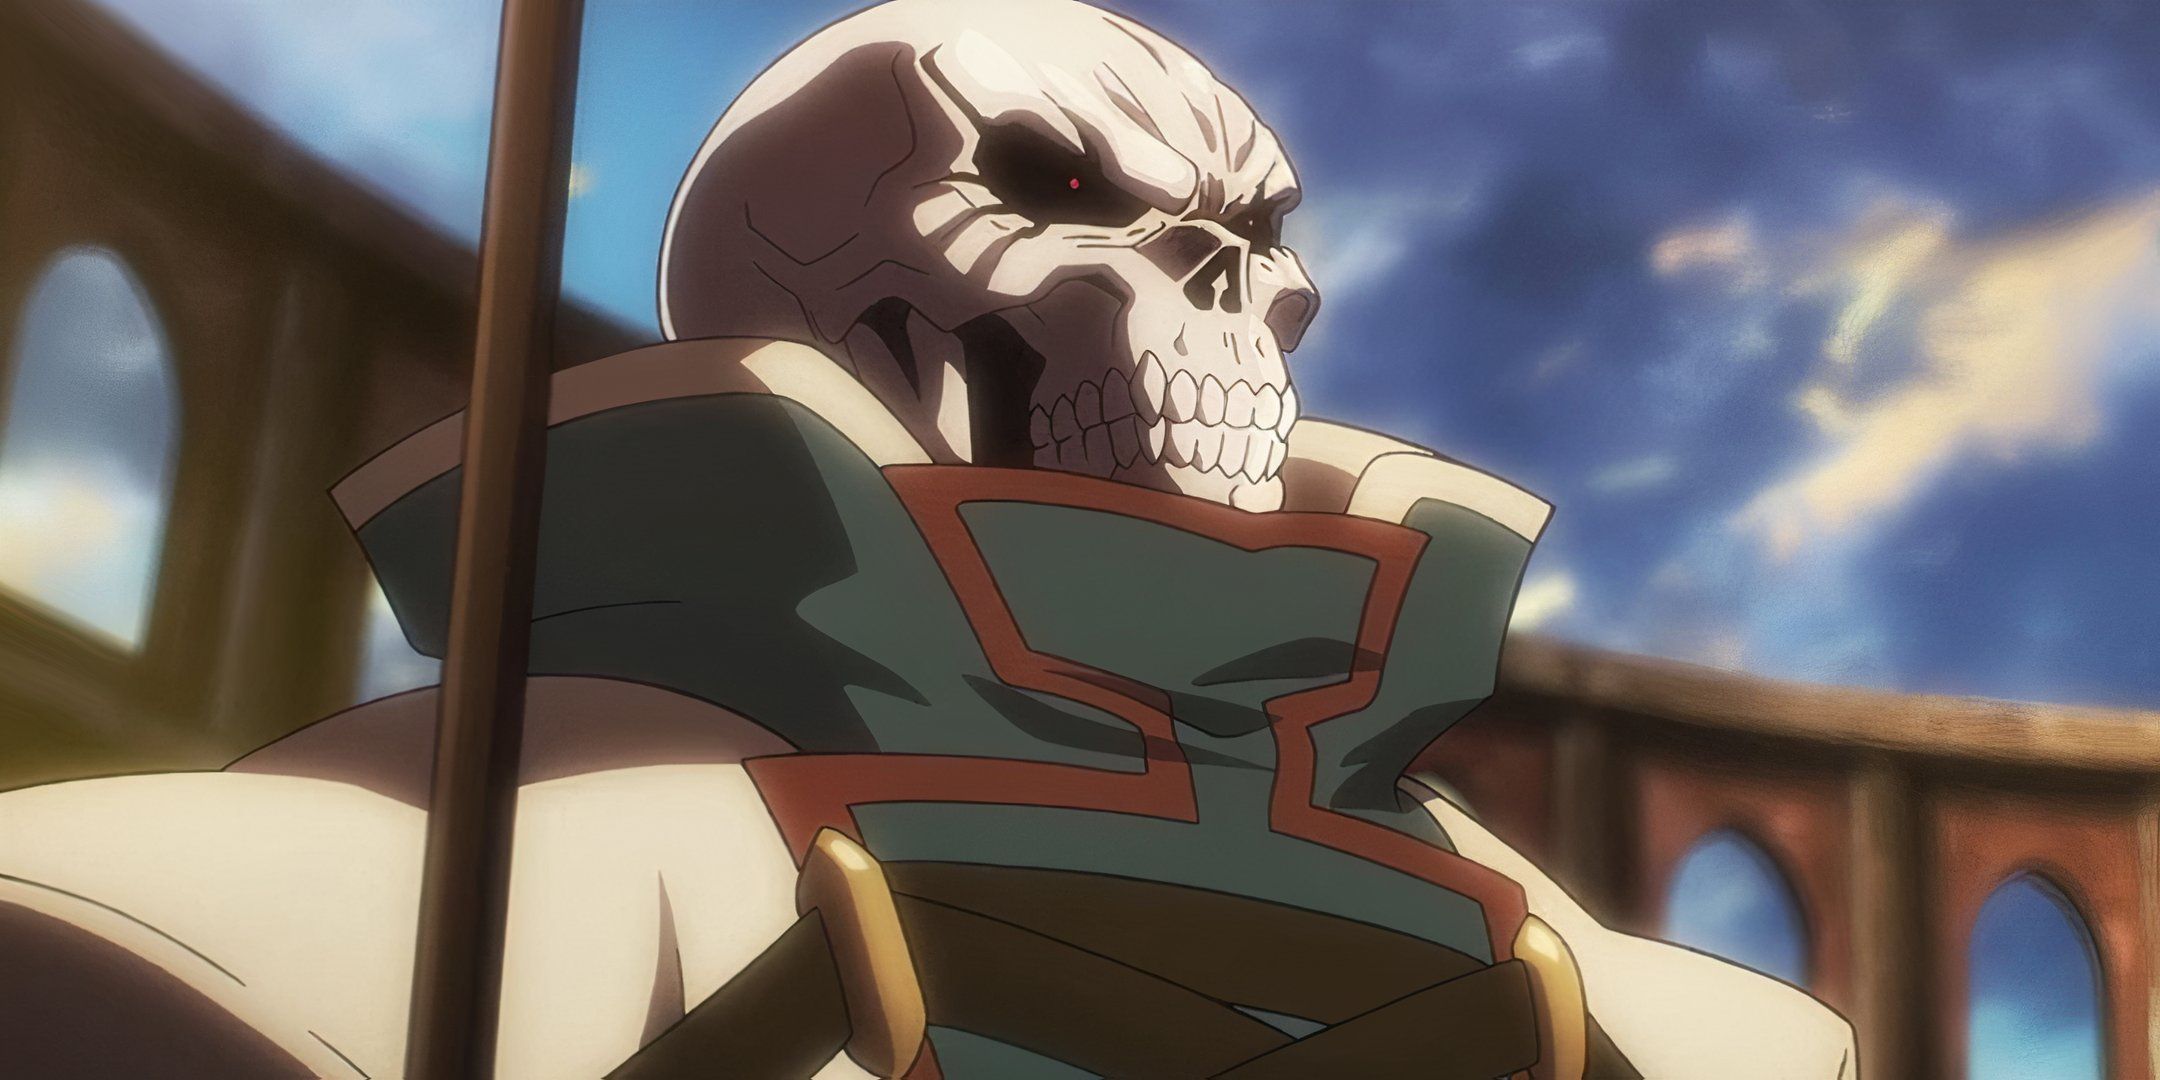 Ainz from Overlord